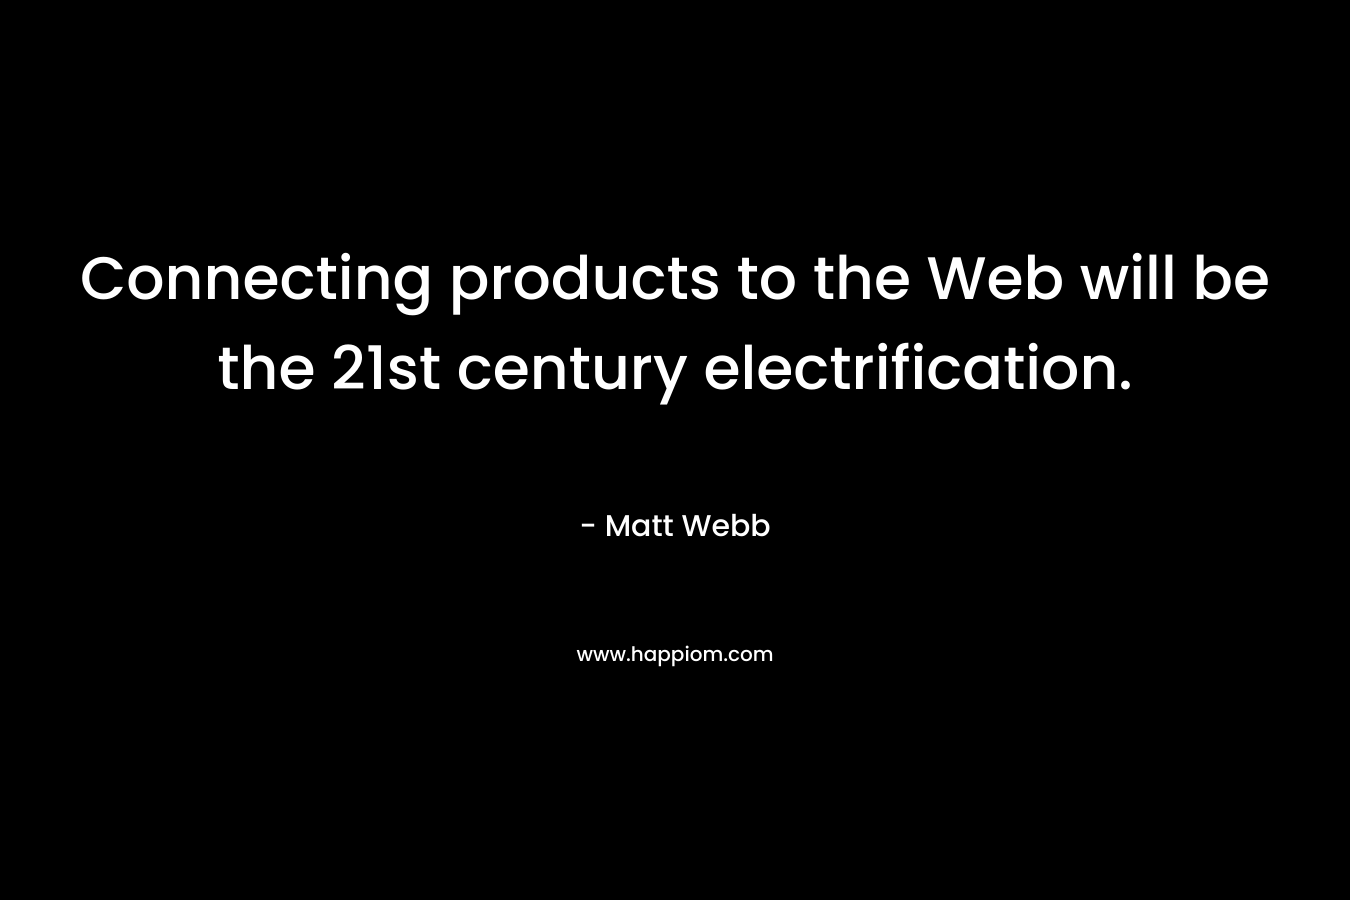 Connecting products to the Web will be the 21st century electrification. – Matt Webb